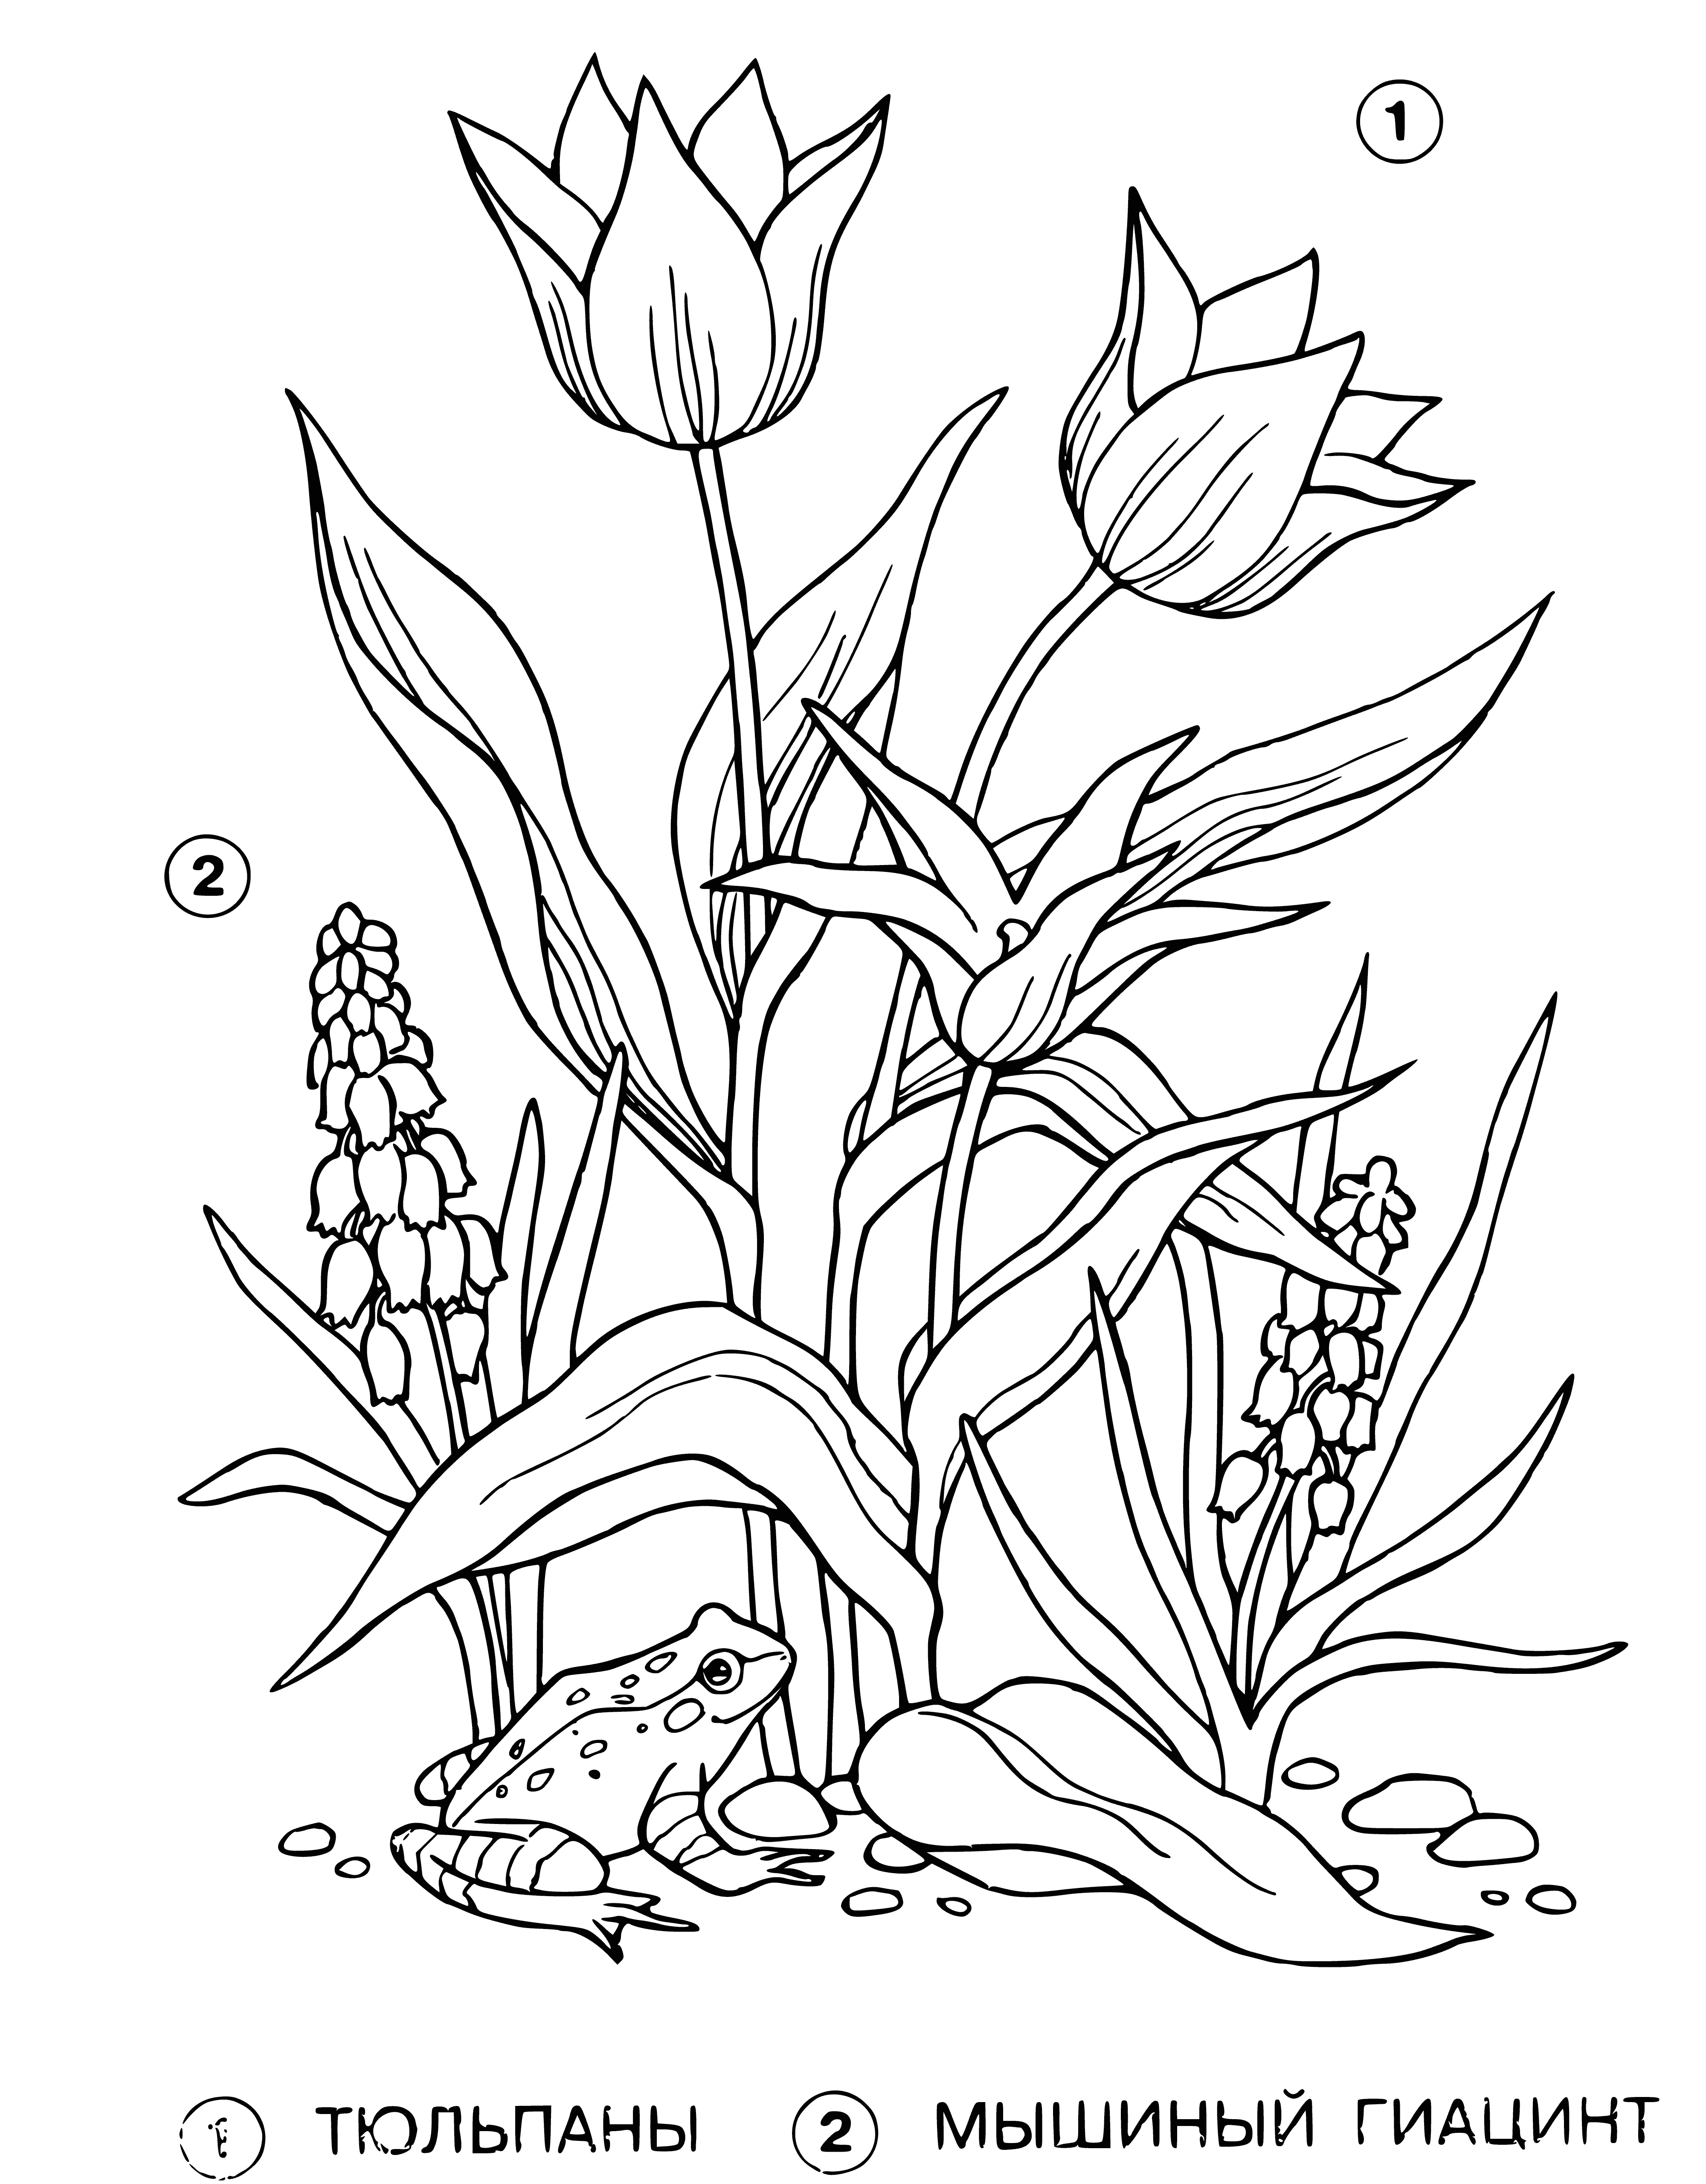 coloring page: Vase with tulip (pink/yellow) & mouse hyacinth (purple/green) in center of coloring page. Tulip wide/deep green, hyacinth thin/light green.